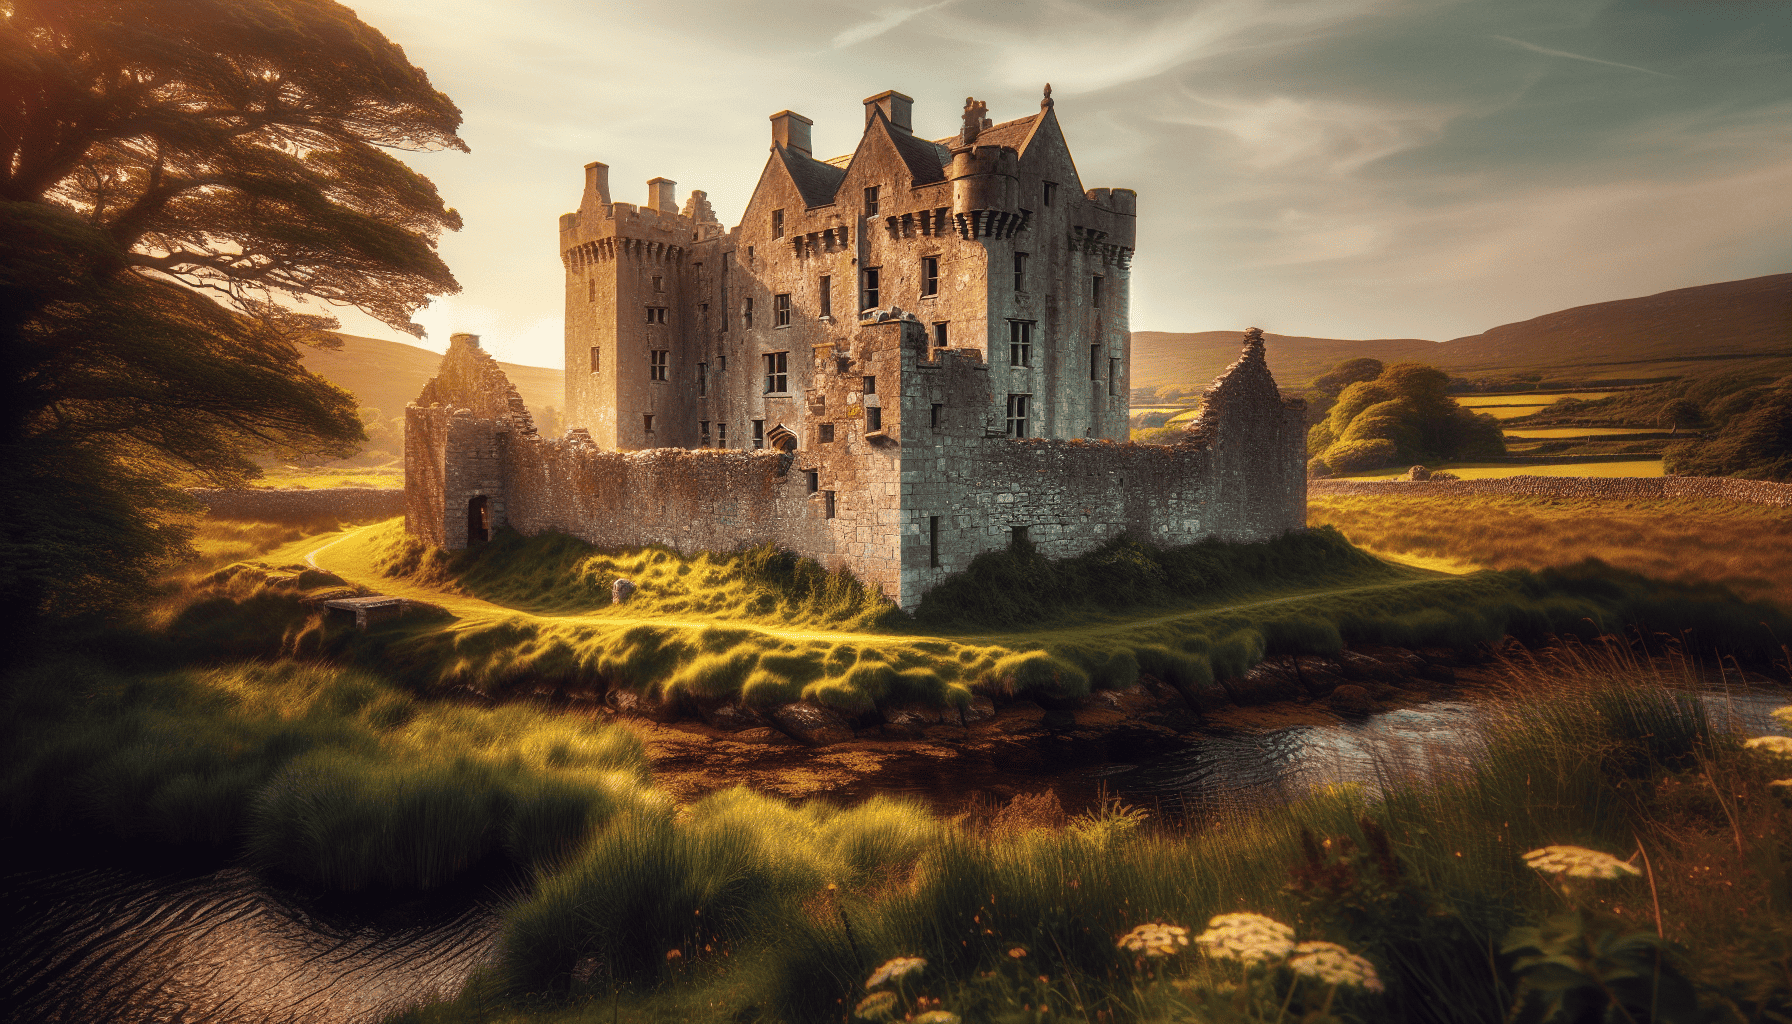 Historic castle in Ireland during summer